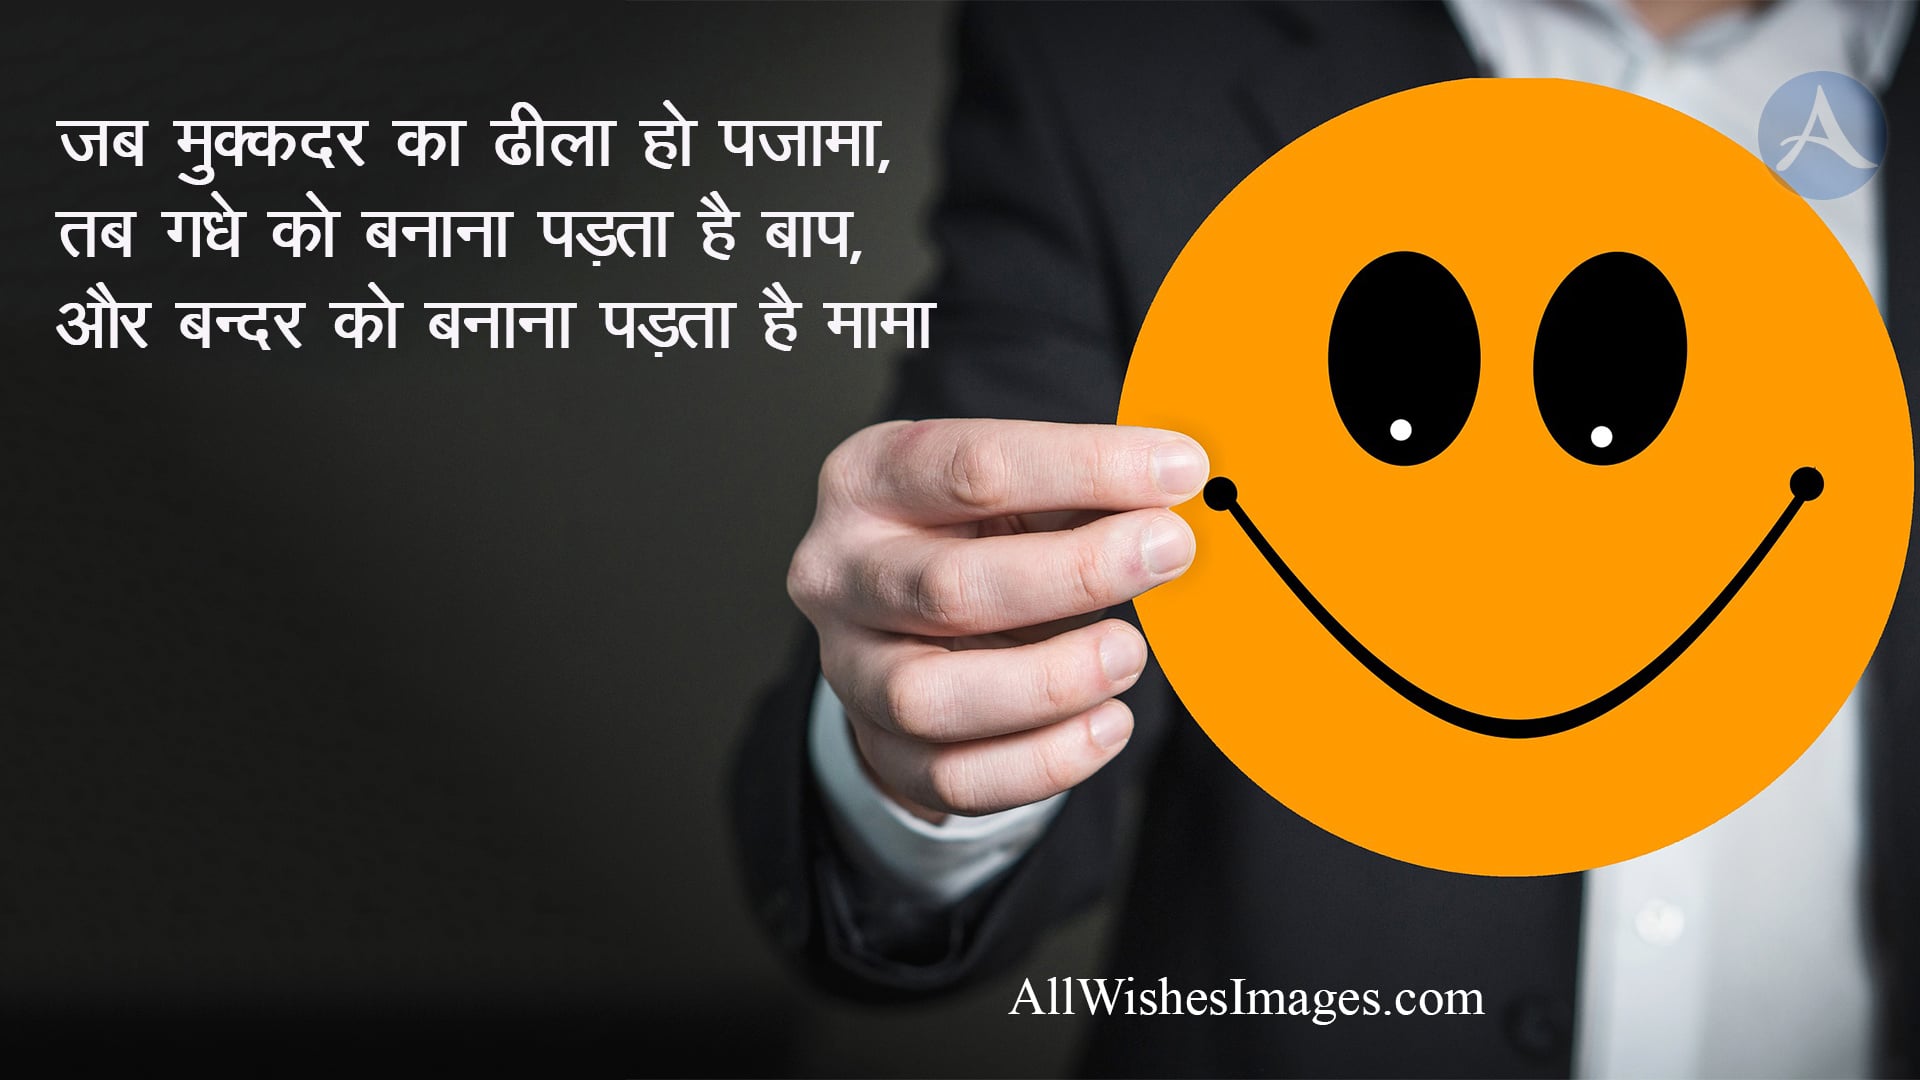 Funny Shayari For Friends - All Wishes Images - Images for WhatsApp